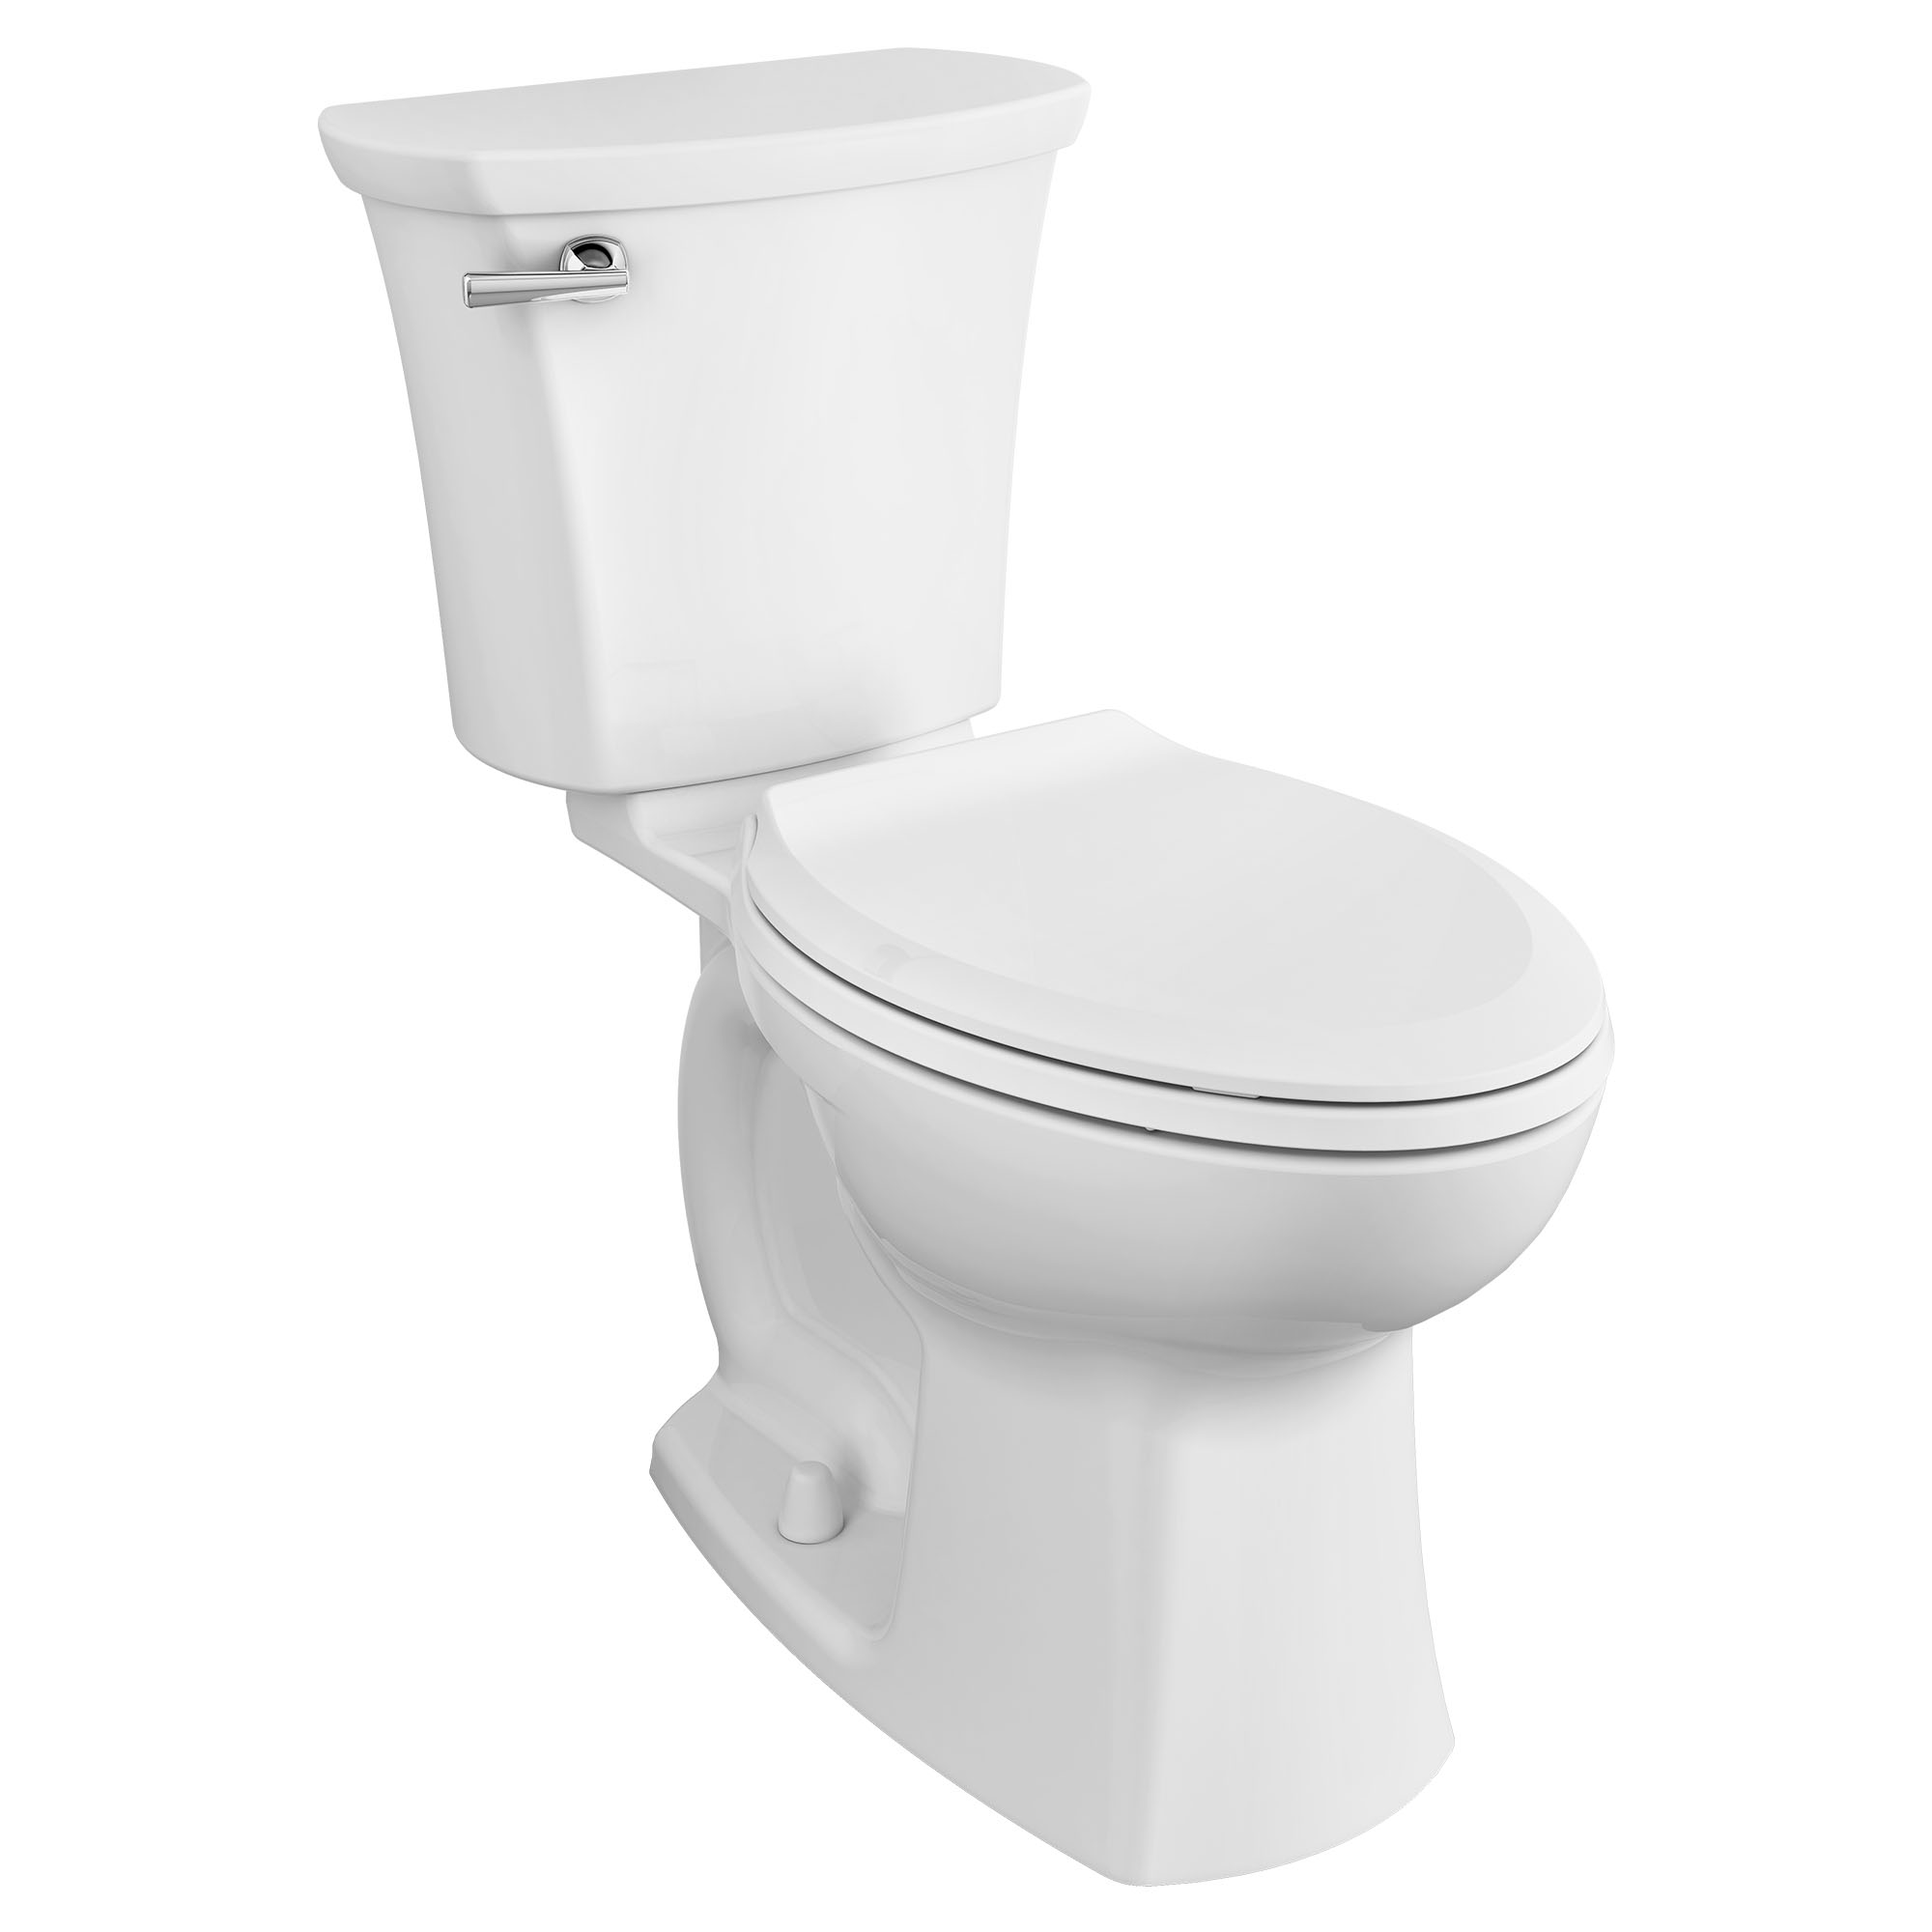 Edgemere 1.28 GPF 16-1/2-in. Elongated-Front HET Toilet with Seat for Trade